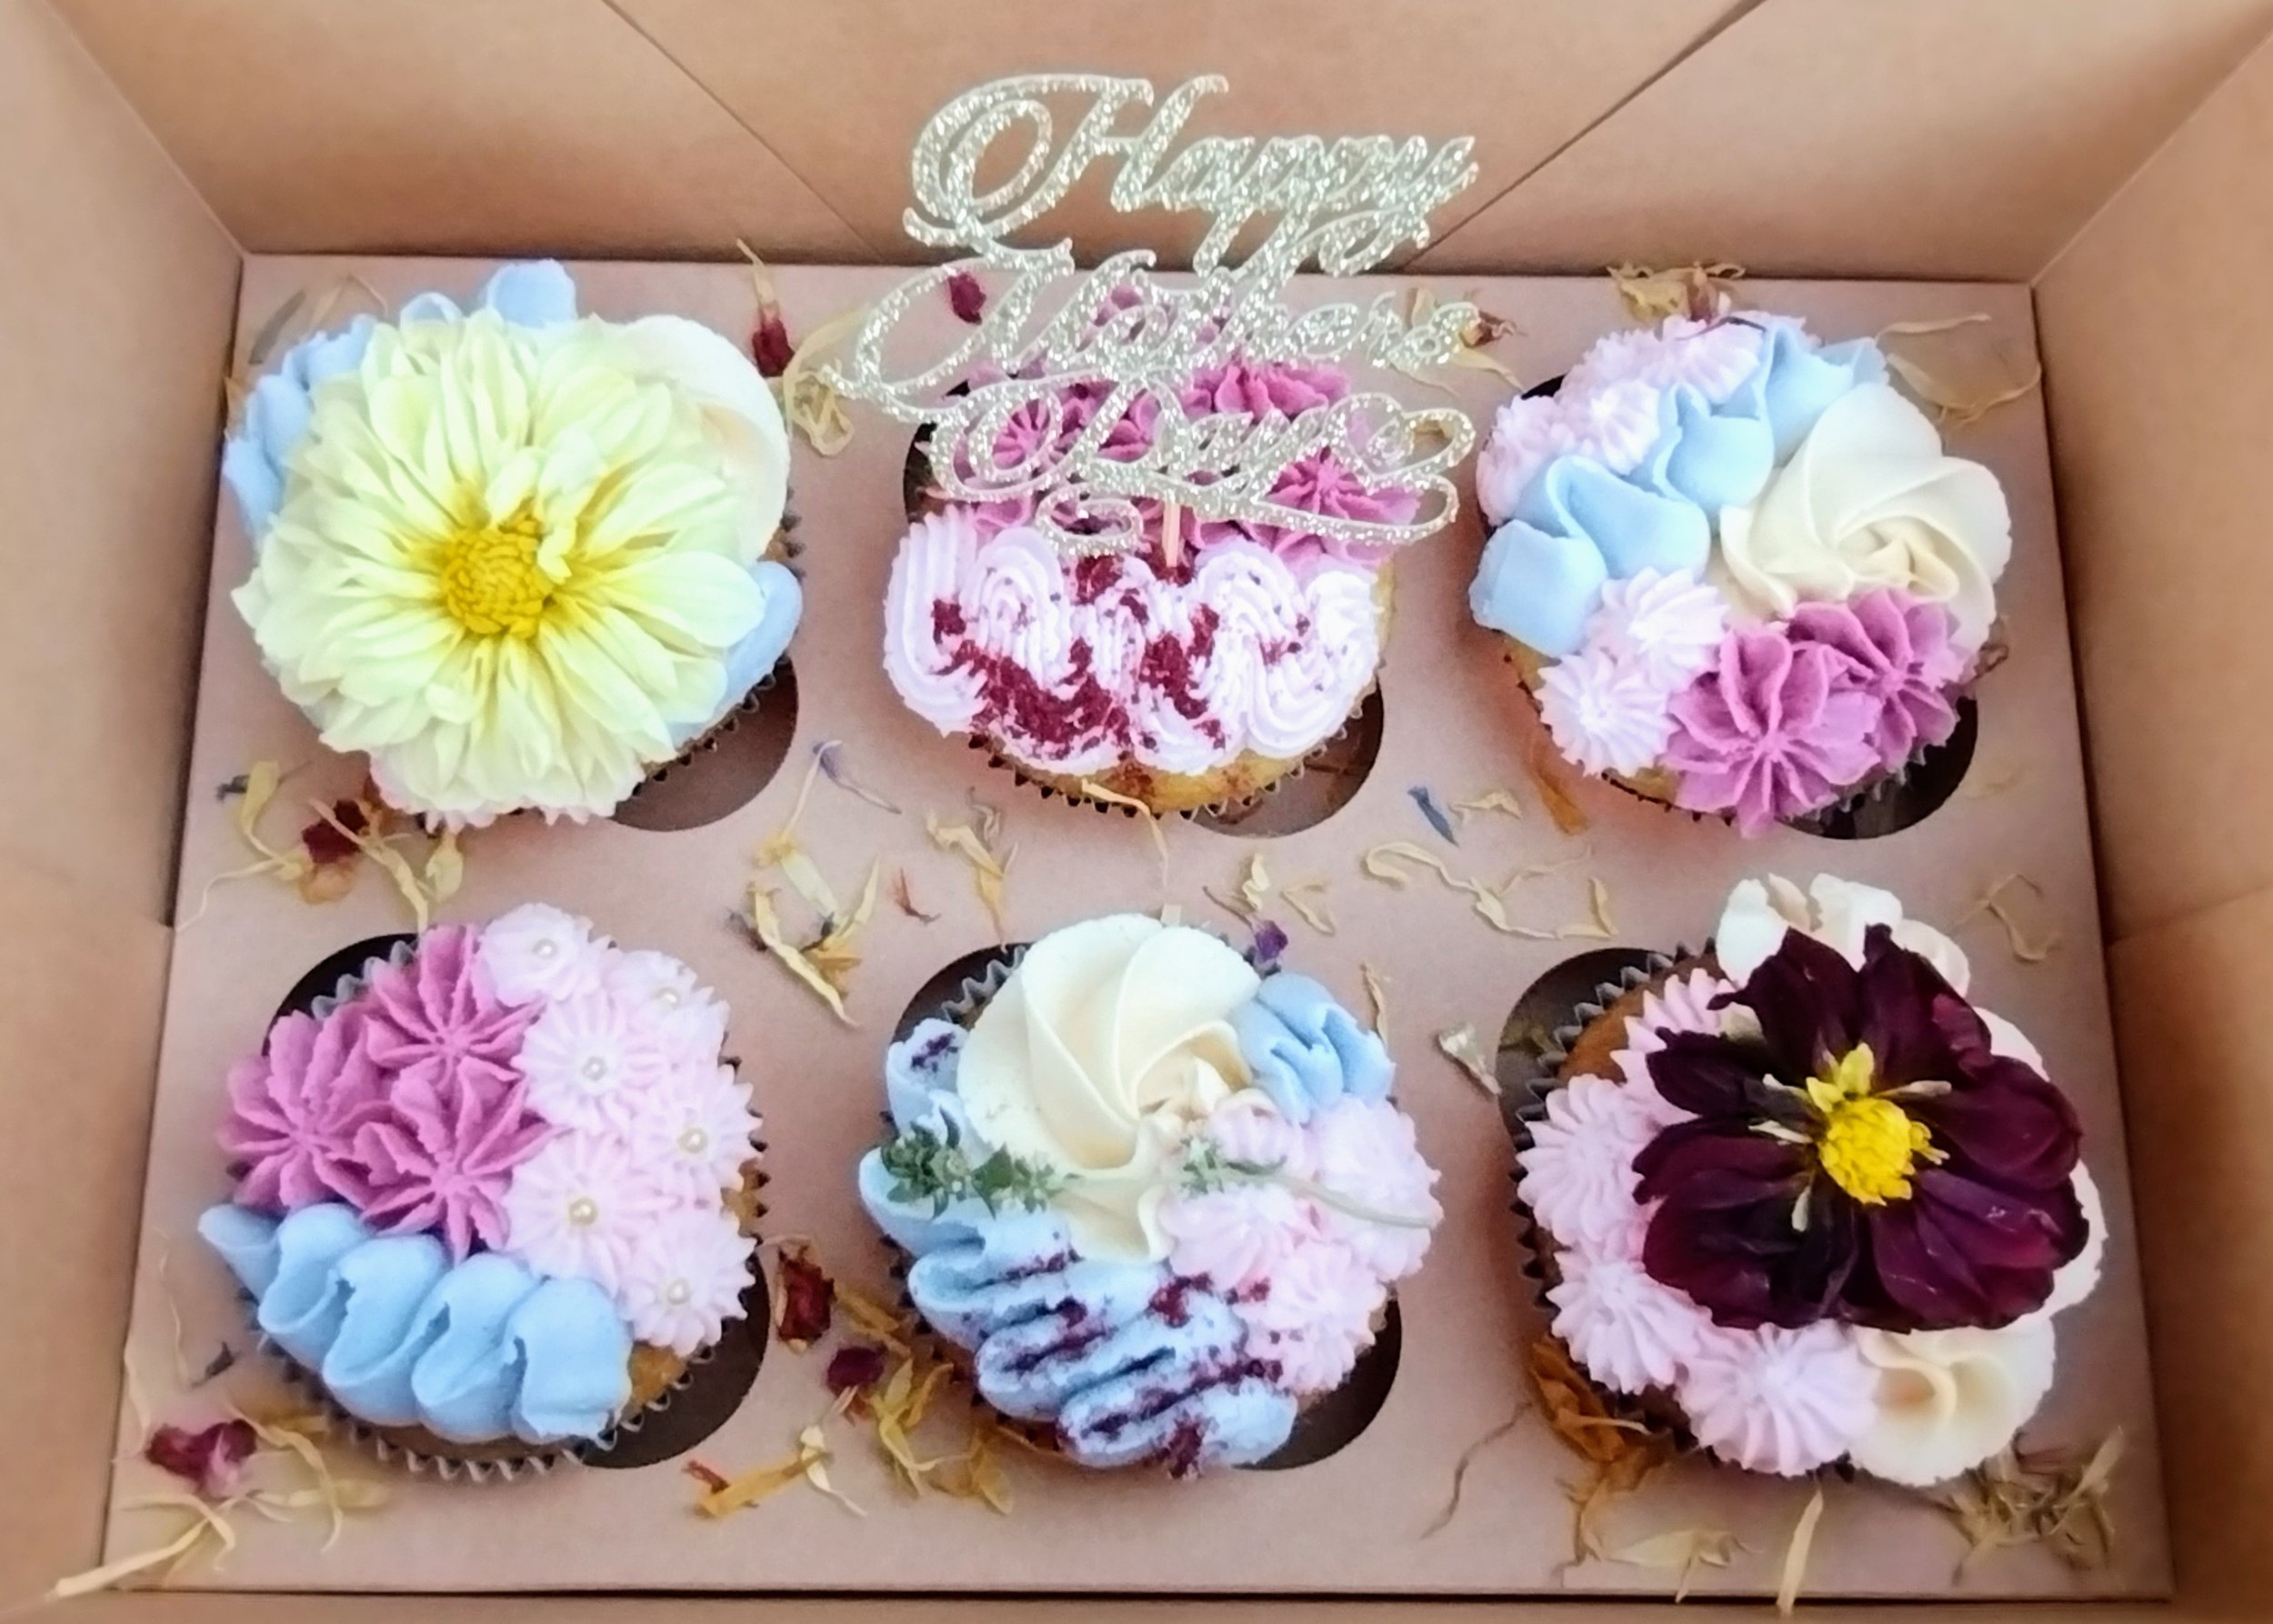 Mothers Day 6 cupcakes pic 2.jpg